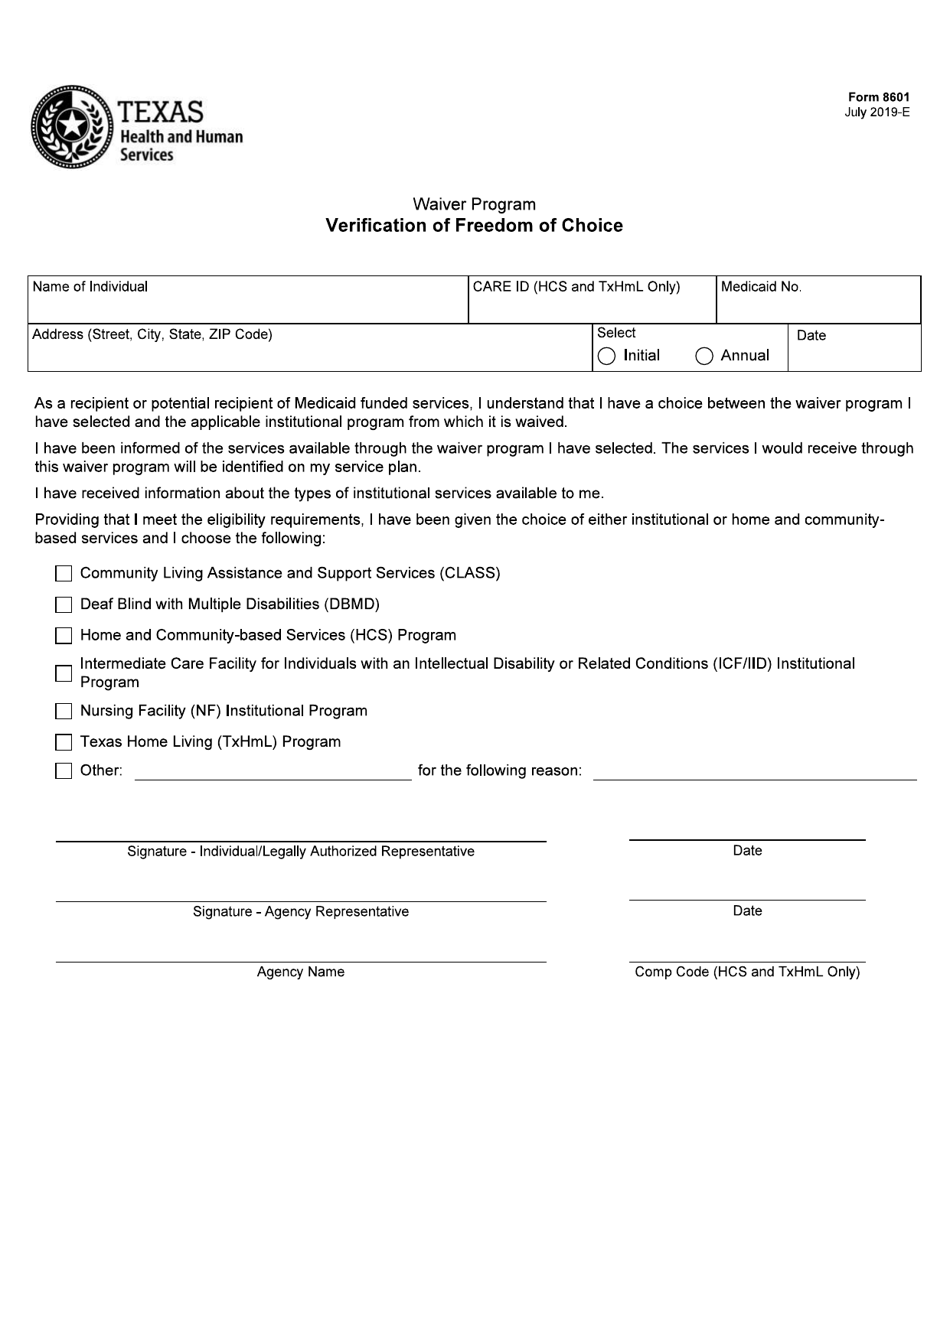 Form 8601 Verification of Freedom of Choice - Texas, Page 1